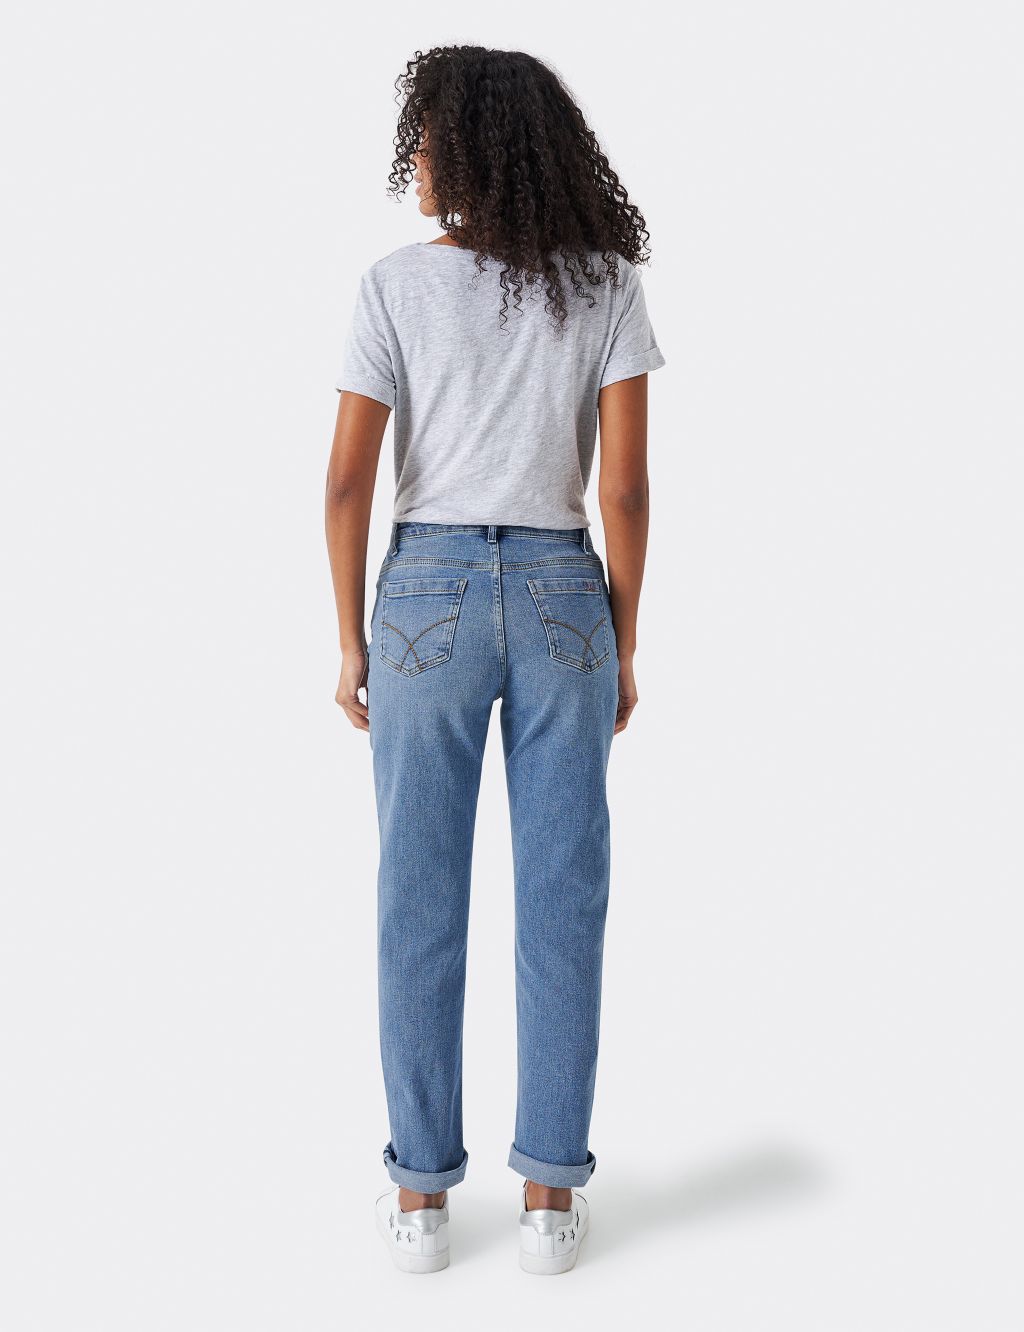 Girlfriend High Waisted Jeans image 3